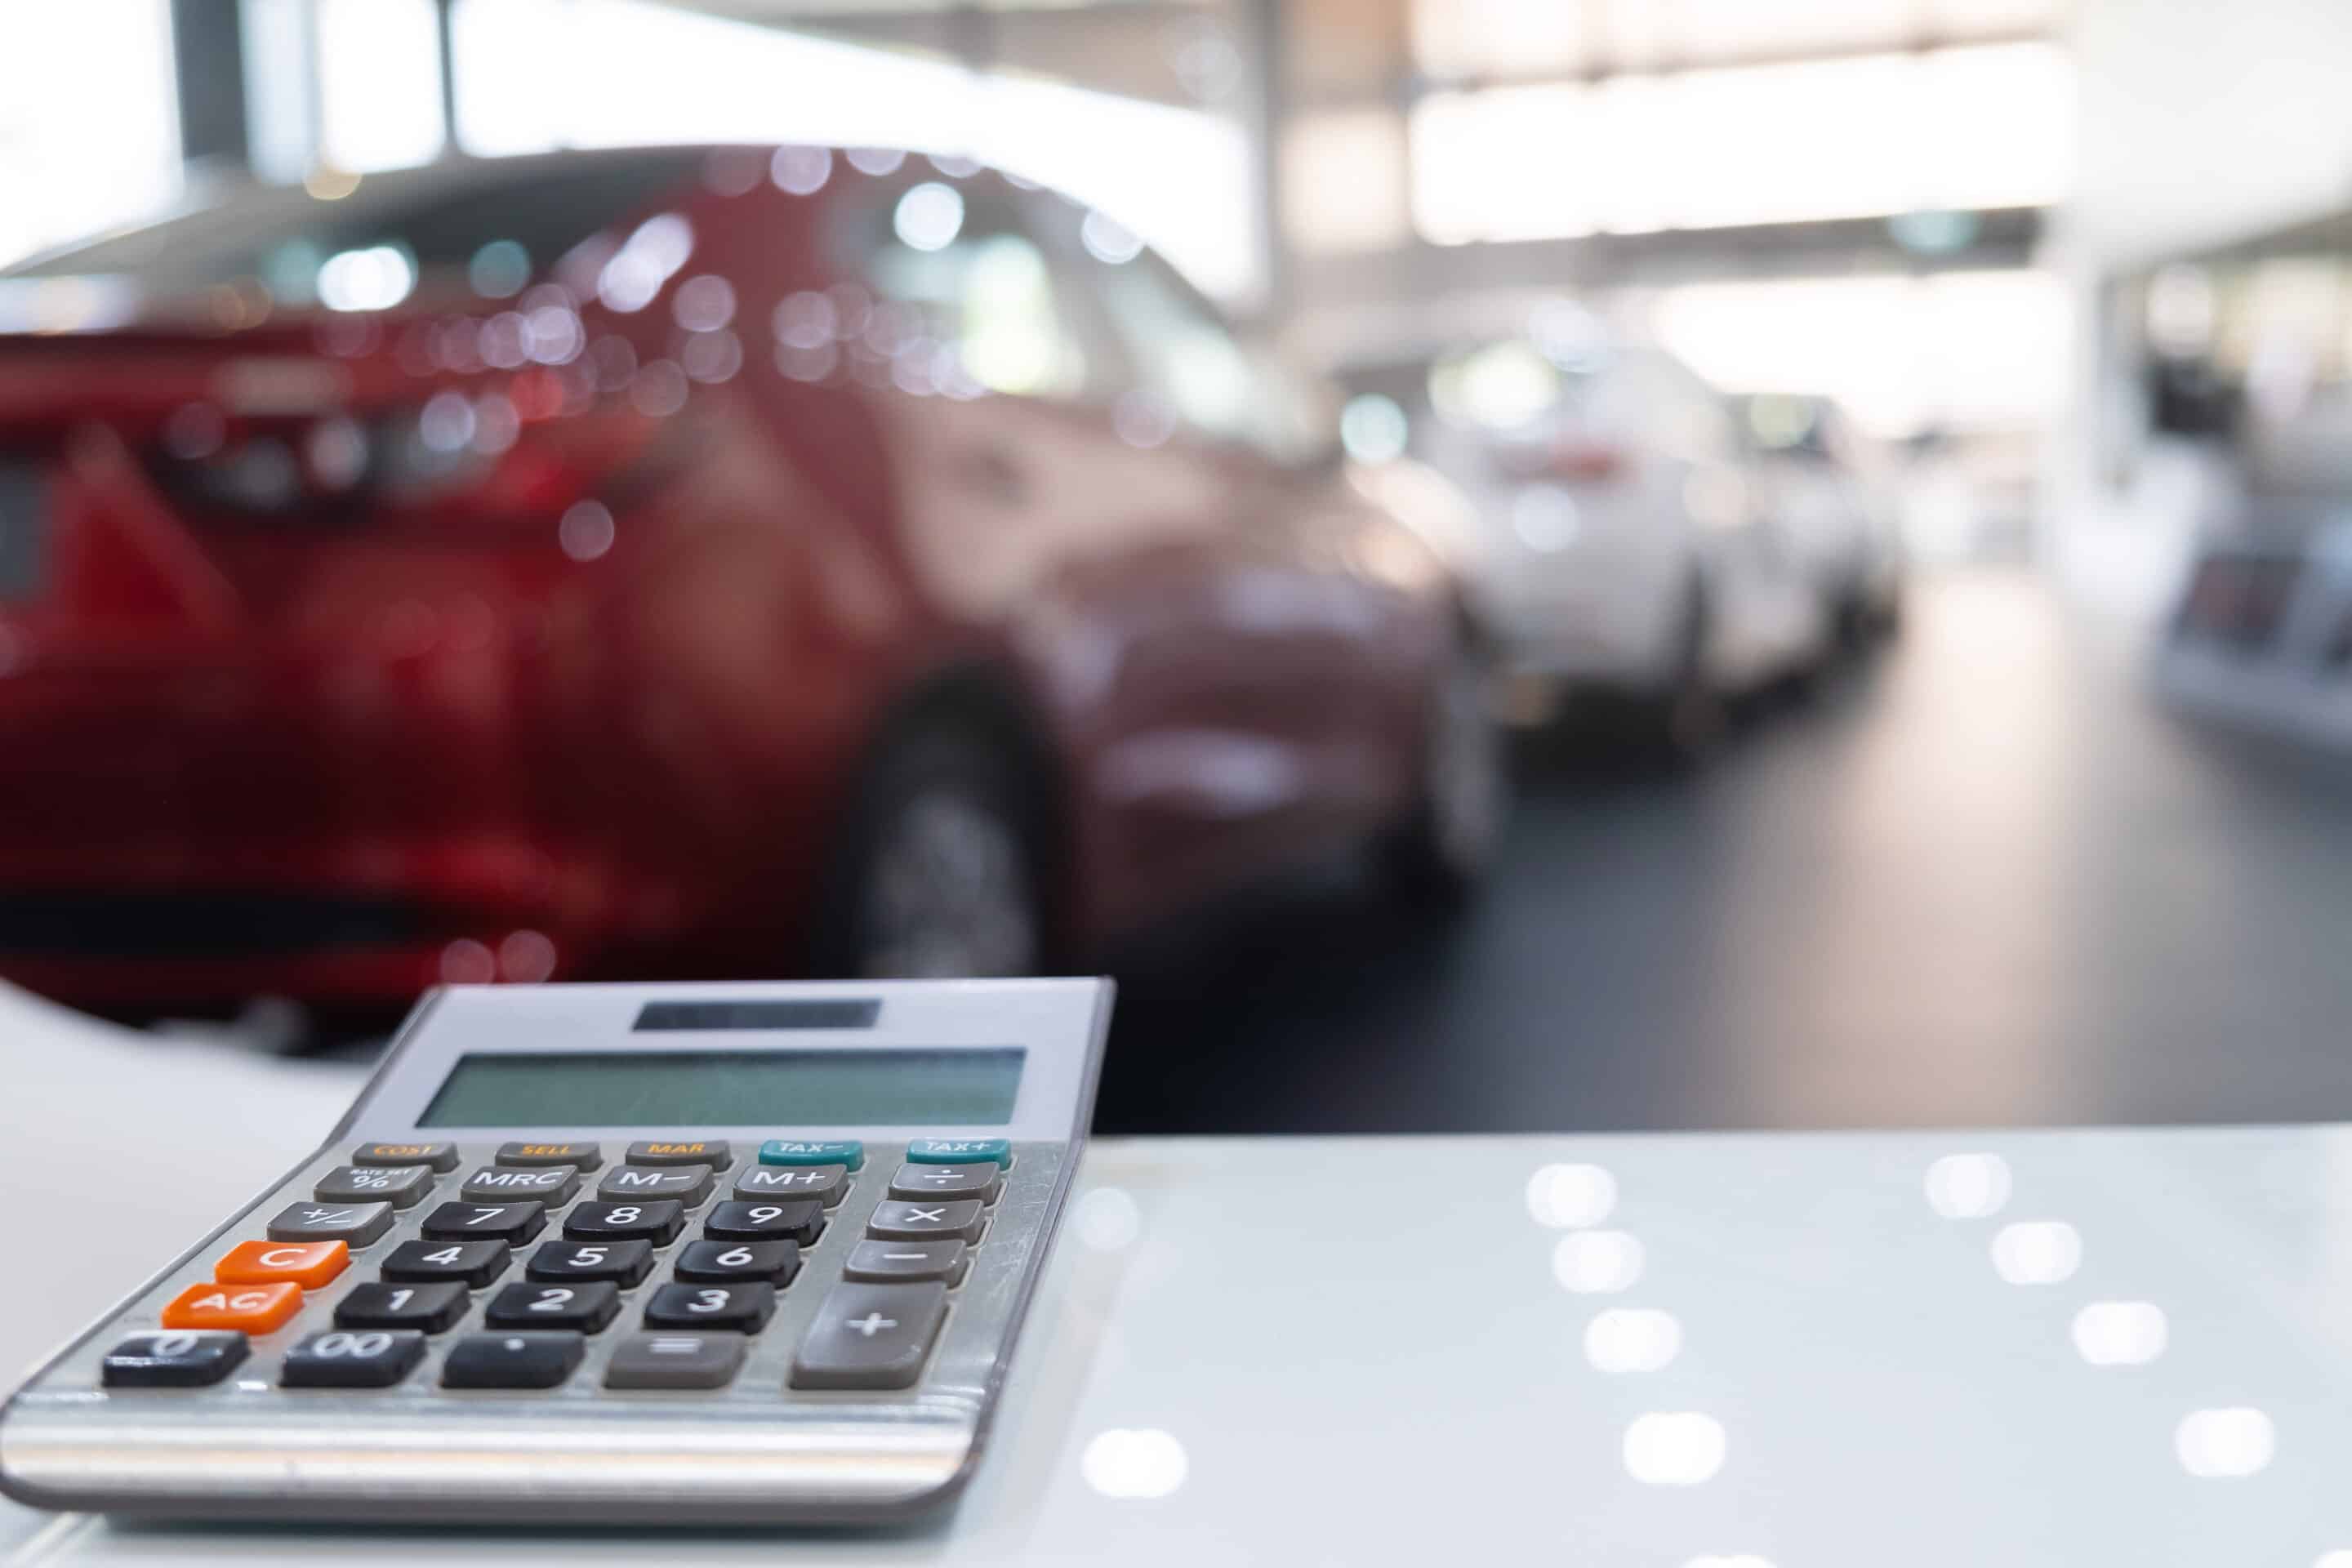 Auto Dealerships Can Save with a Utility Audit